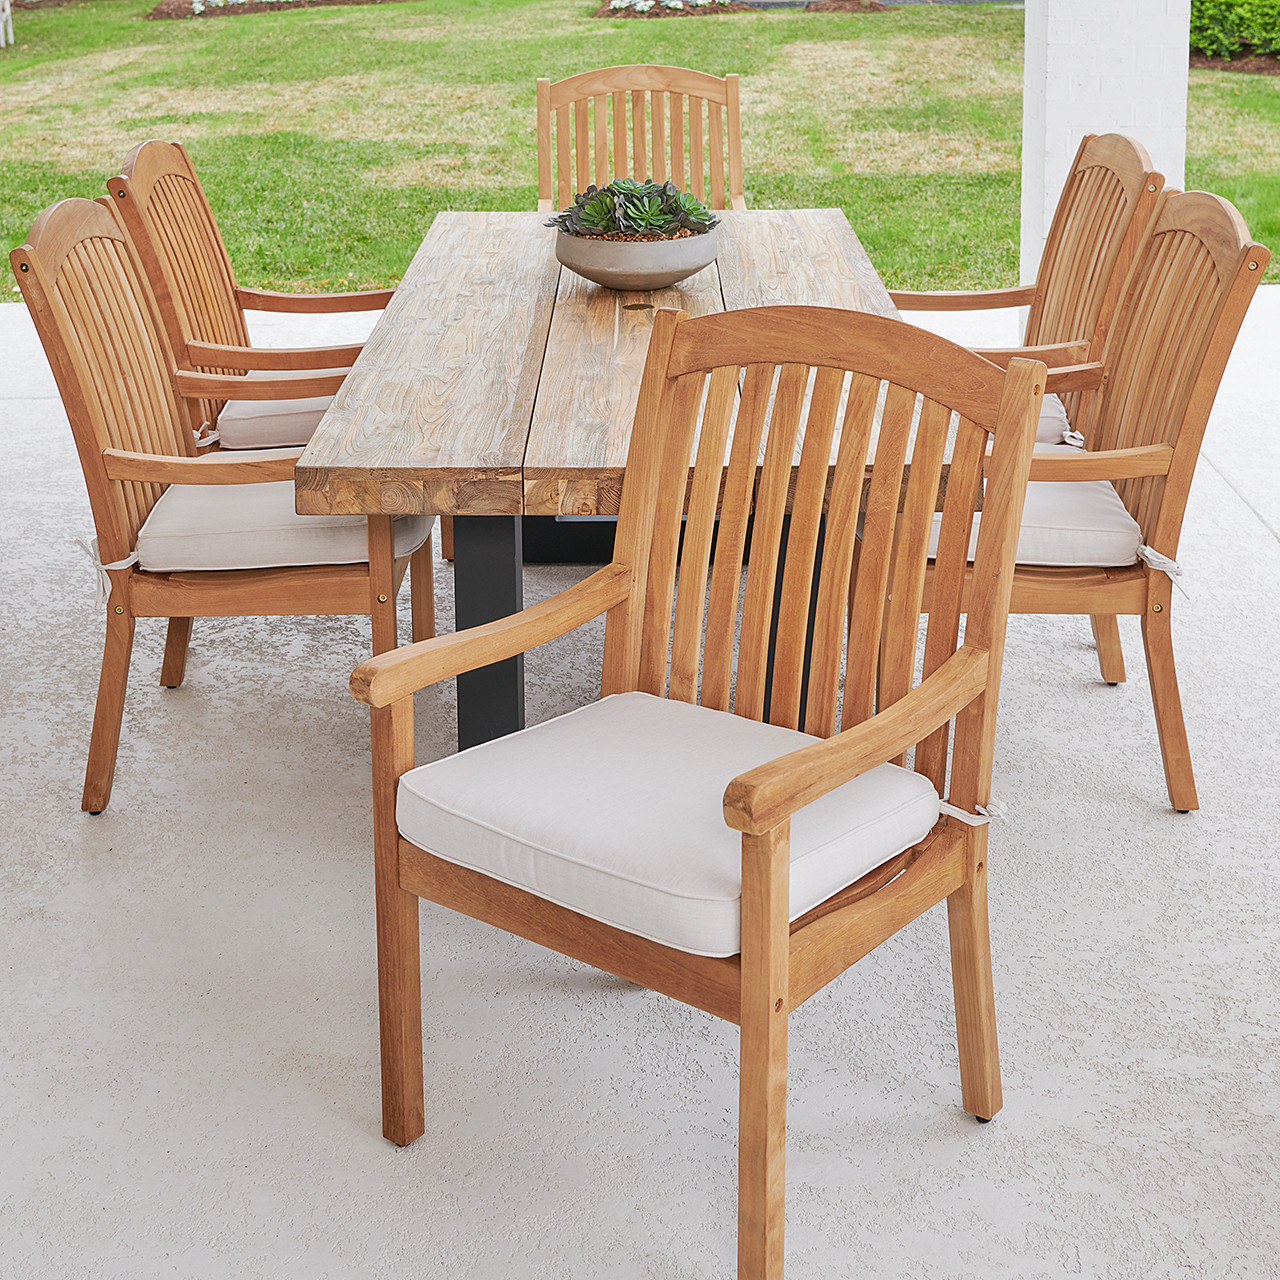 Eastchester Teak with Cushions 7 Piece Dining Set + Balencia 87 x 40 in. Table